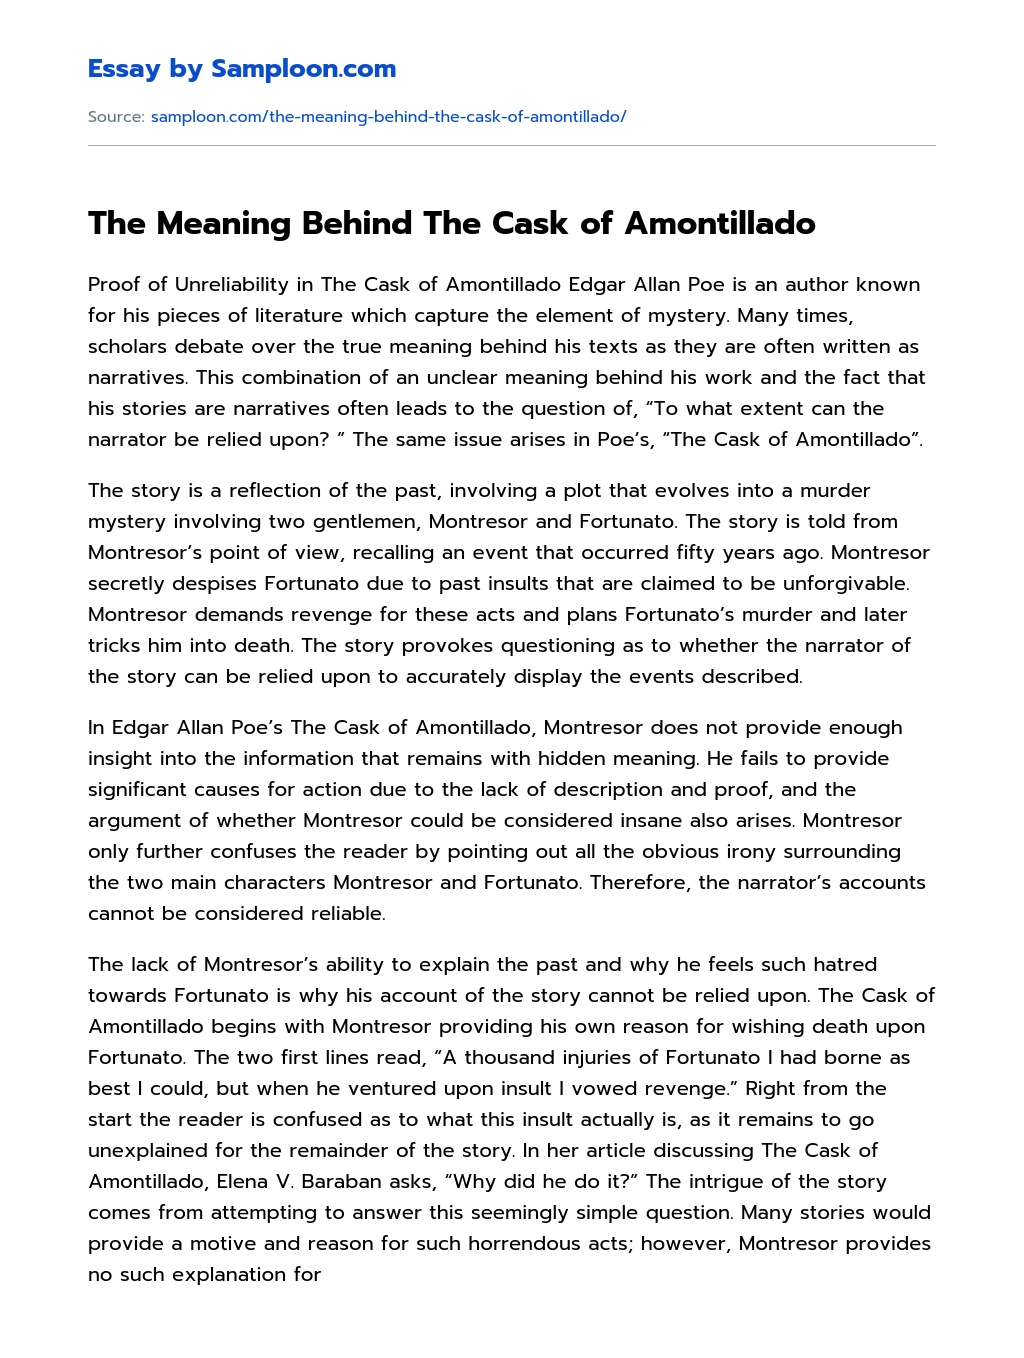 The Meaning Behind The Cask of Amontillado Analytical Essay essay